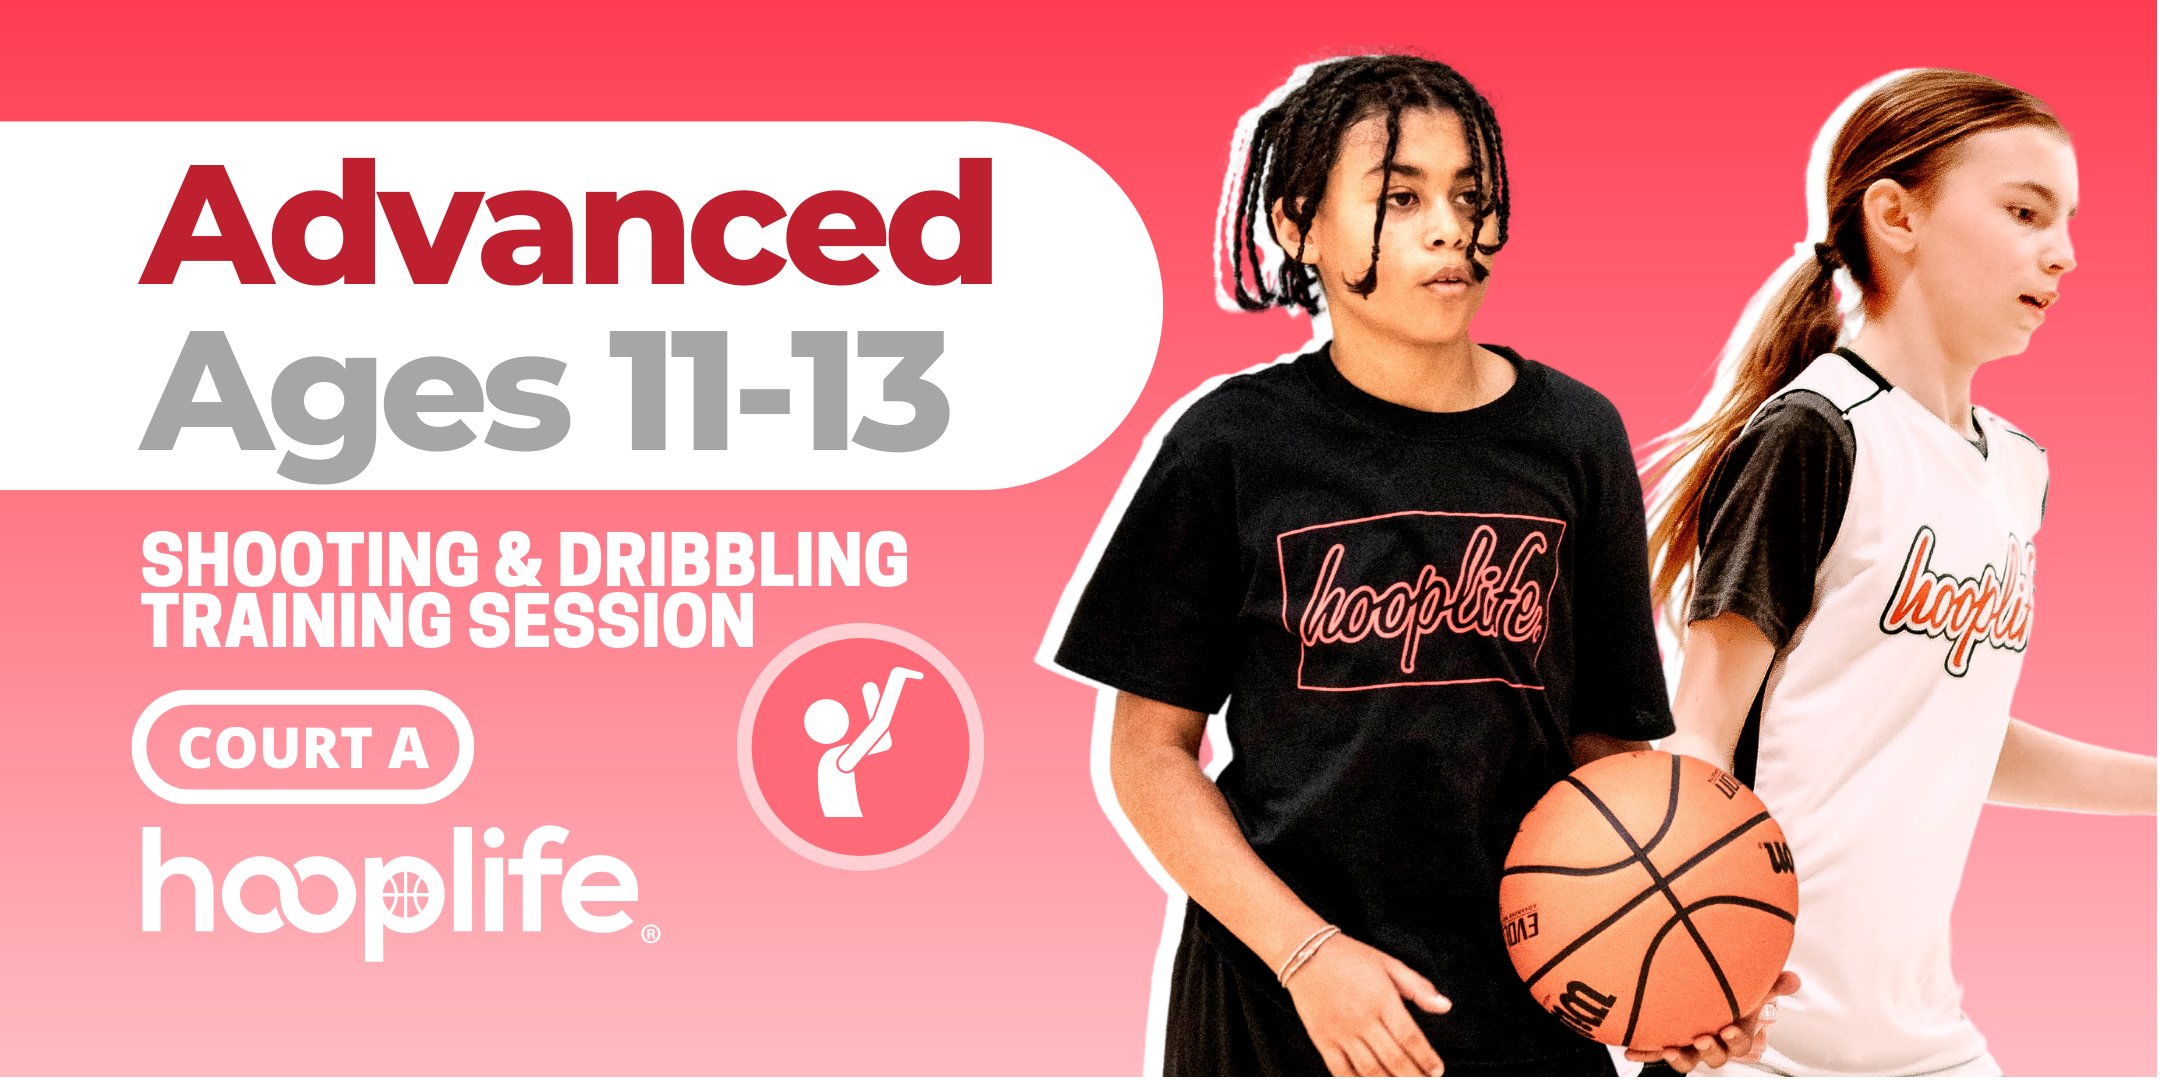 Ages 11-13 Advanced Shooting & Dribbling Training Session